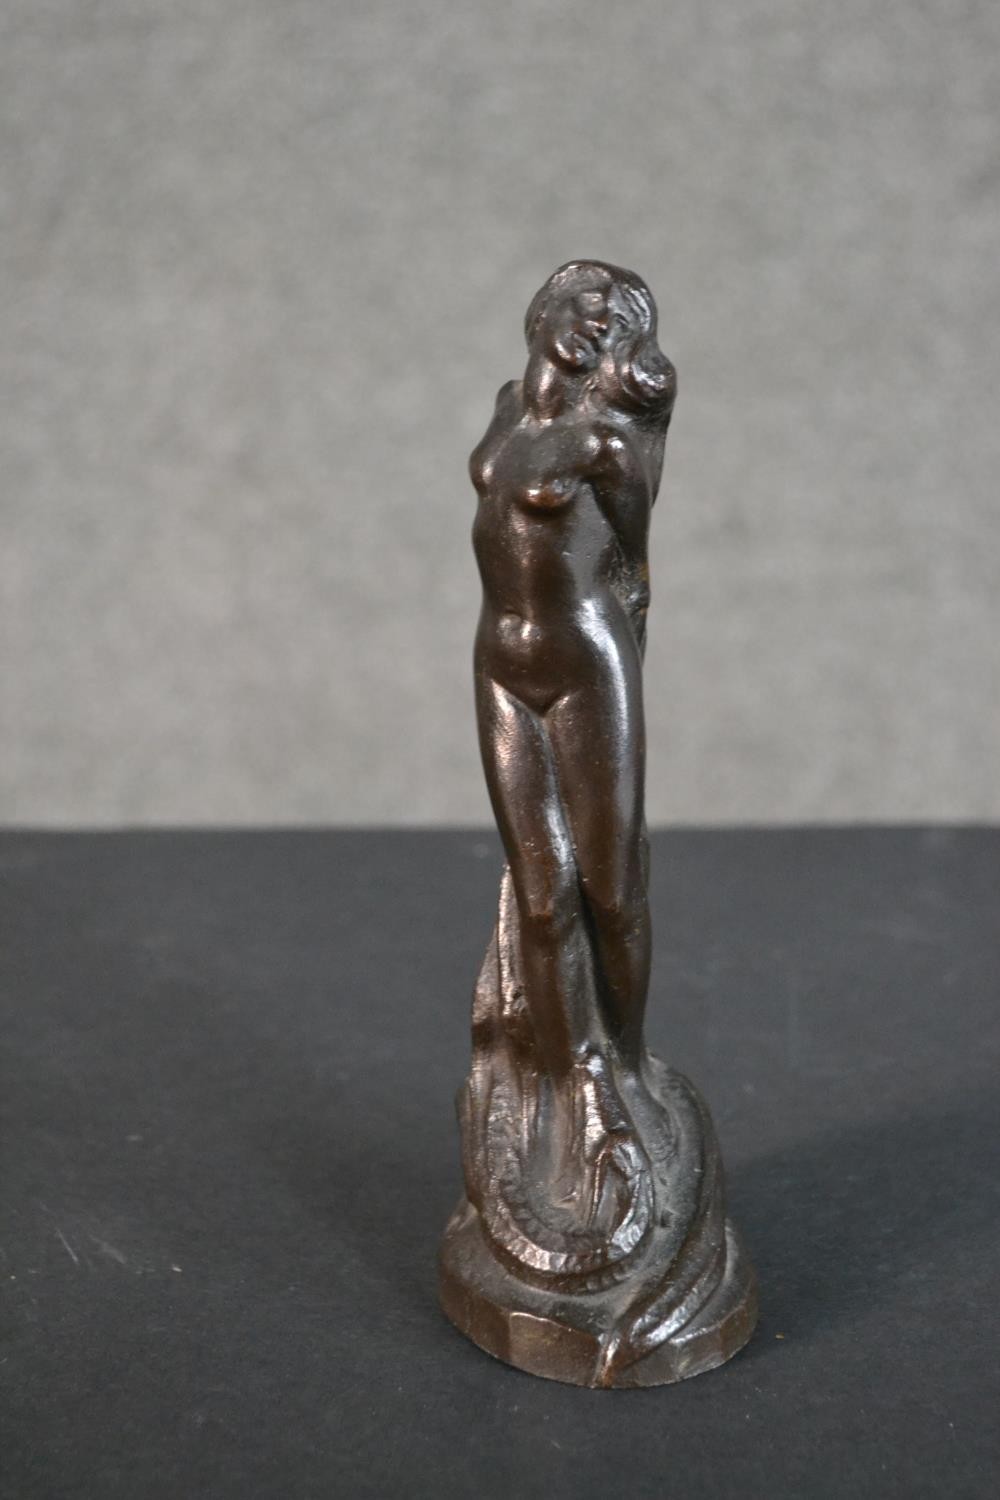 A 20th century bronze figurine of a nude woman tied at a stake with dragon at her feet. Dated